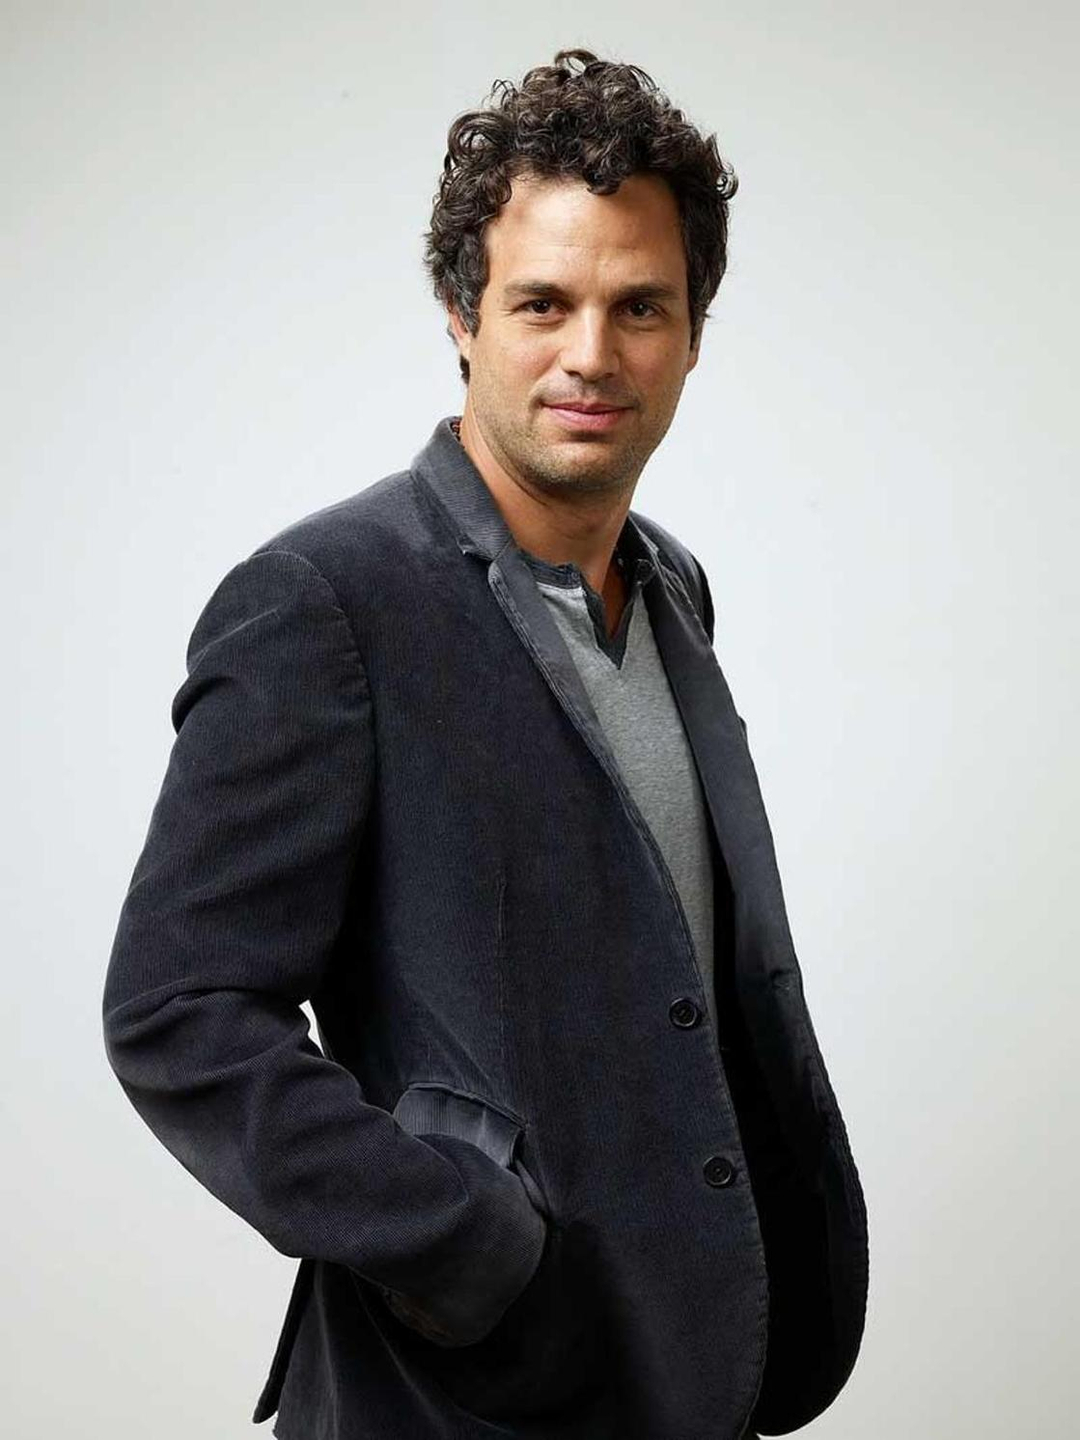 Mark Ruffalo who are his parents